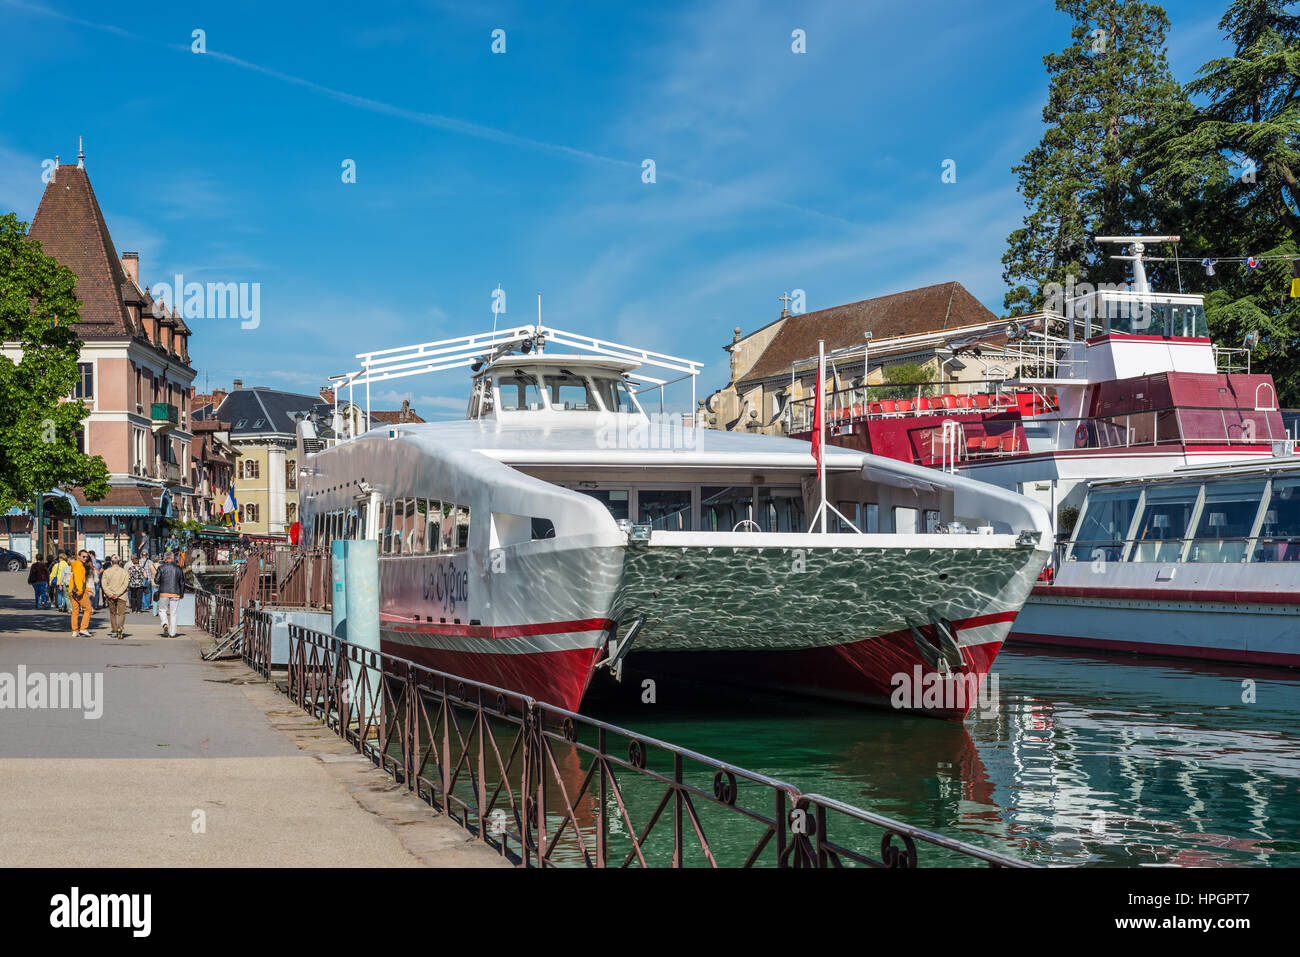 Annecy, France - May 25, 2016: Tourist excursion boats are moored at the pier seen during the spring sunny day in Annecy, Haute Savoie, French Alps, F Stock Photo